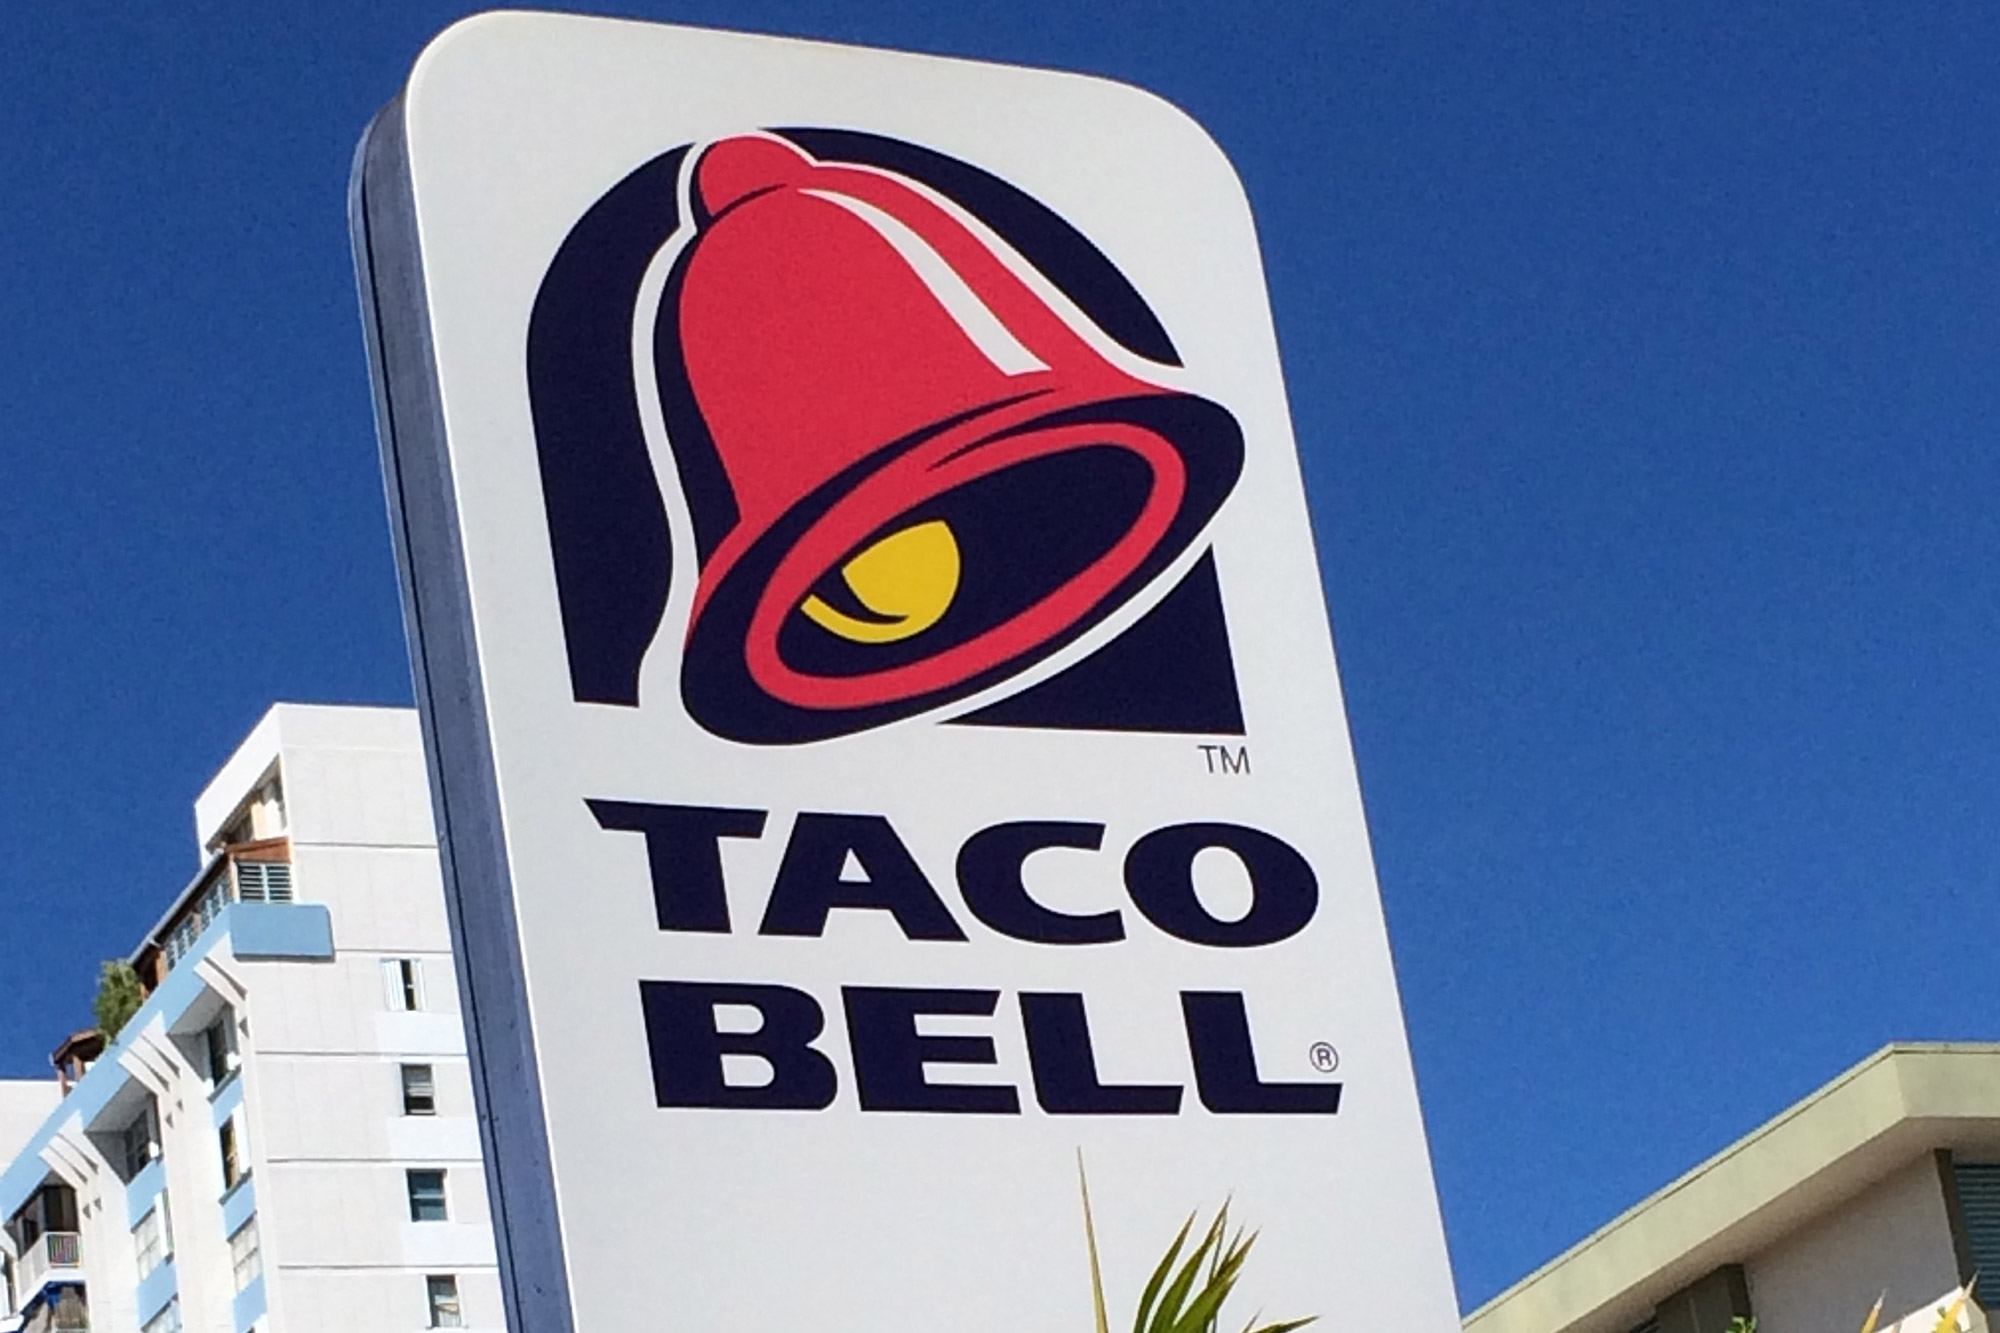 A Taco Bell sign is pictured in San Juan, Puerto Rico on Jan. 26, 2015. (Peter Johansky —Getty Images)